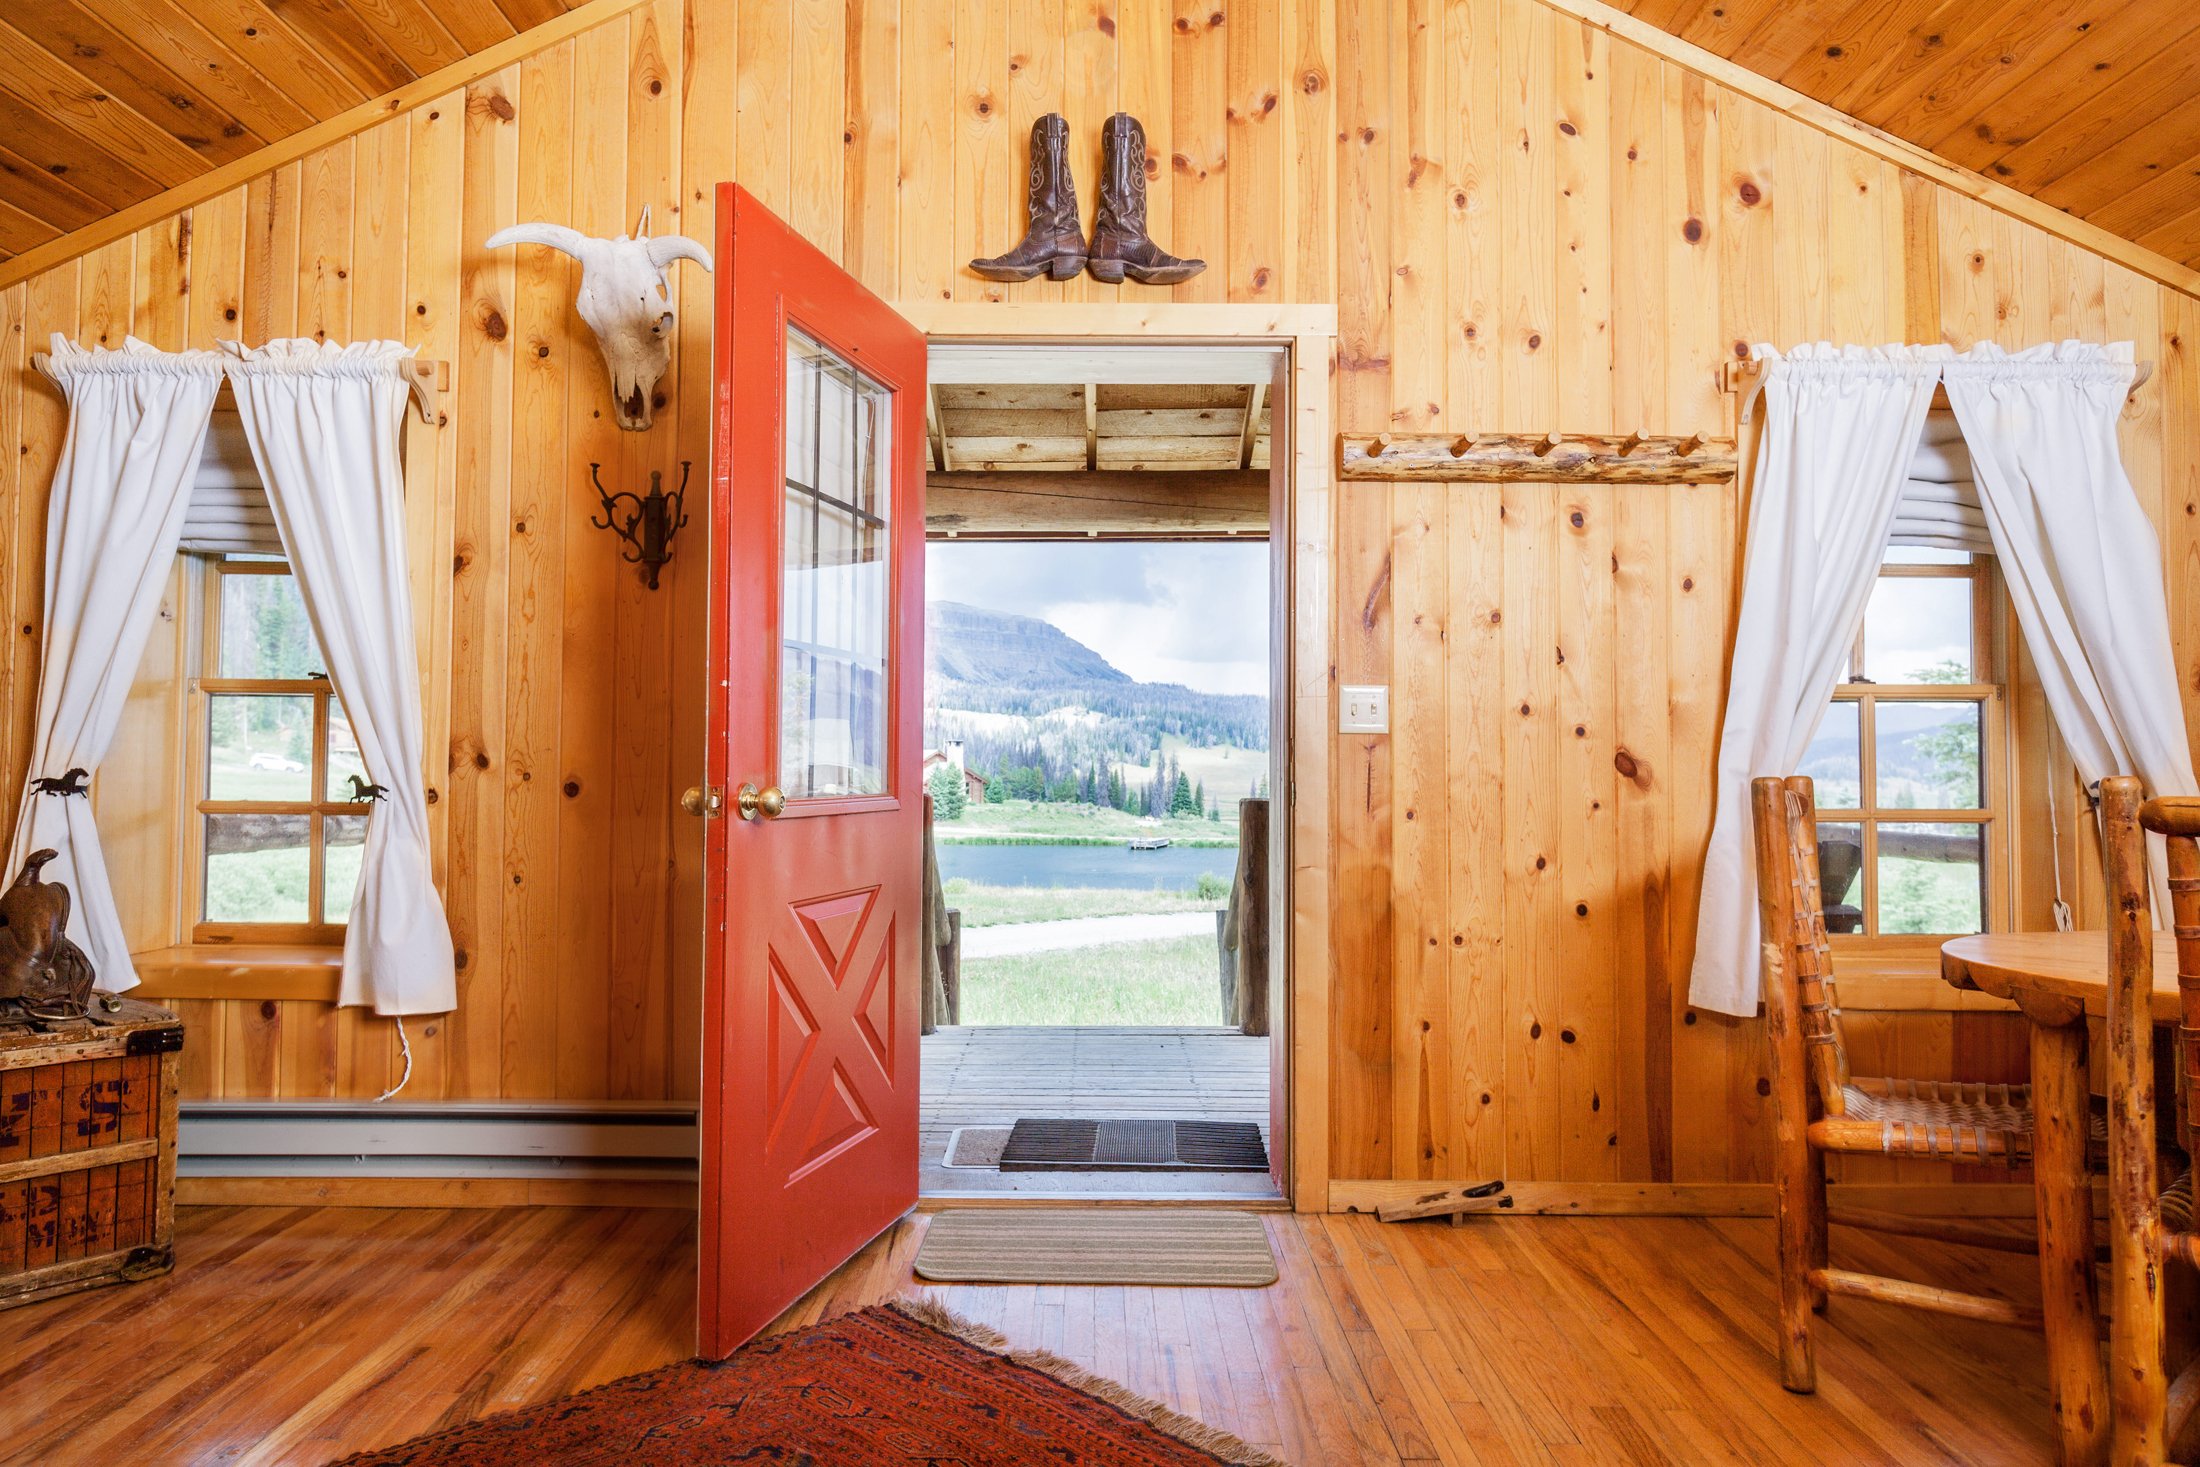 Recently hailed as “The Perfect Place to Get Away from It All” by popular website Only in Your State, Brooks Lake Lodge & Spa offers guests elegantly rustic lodge rooms and cabins.